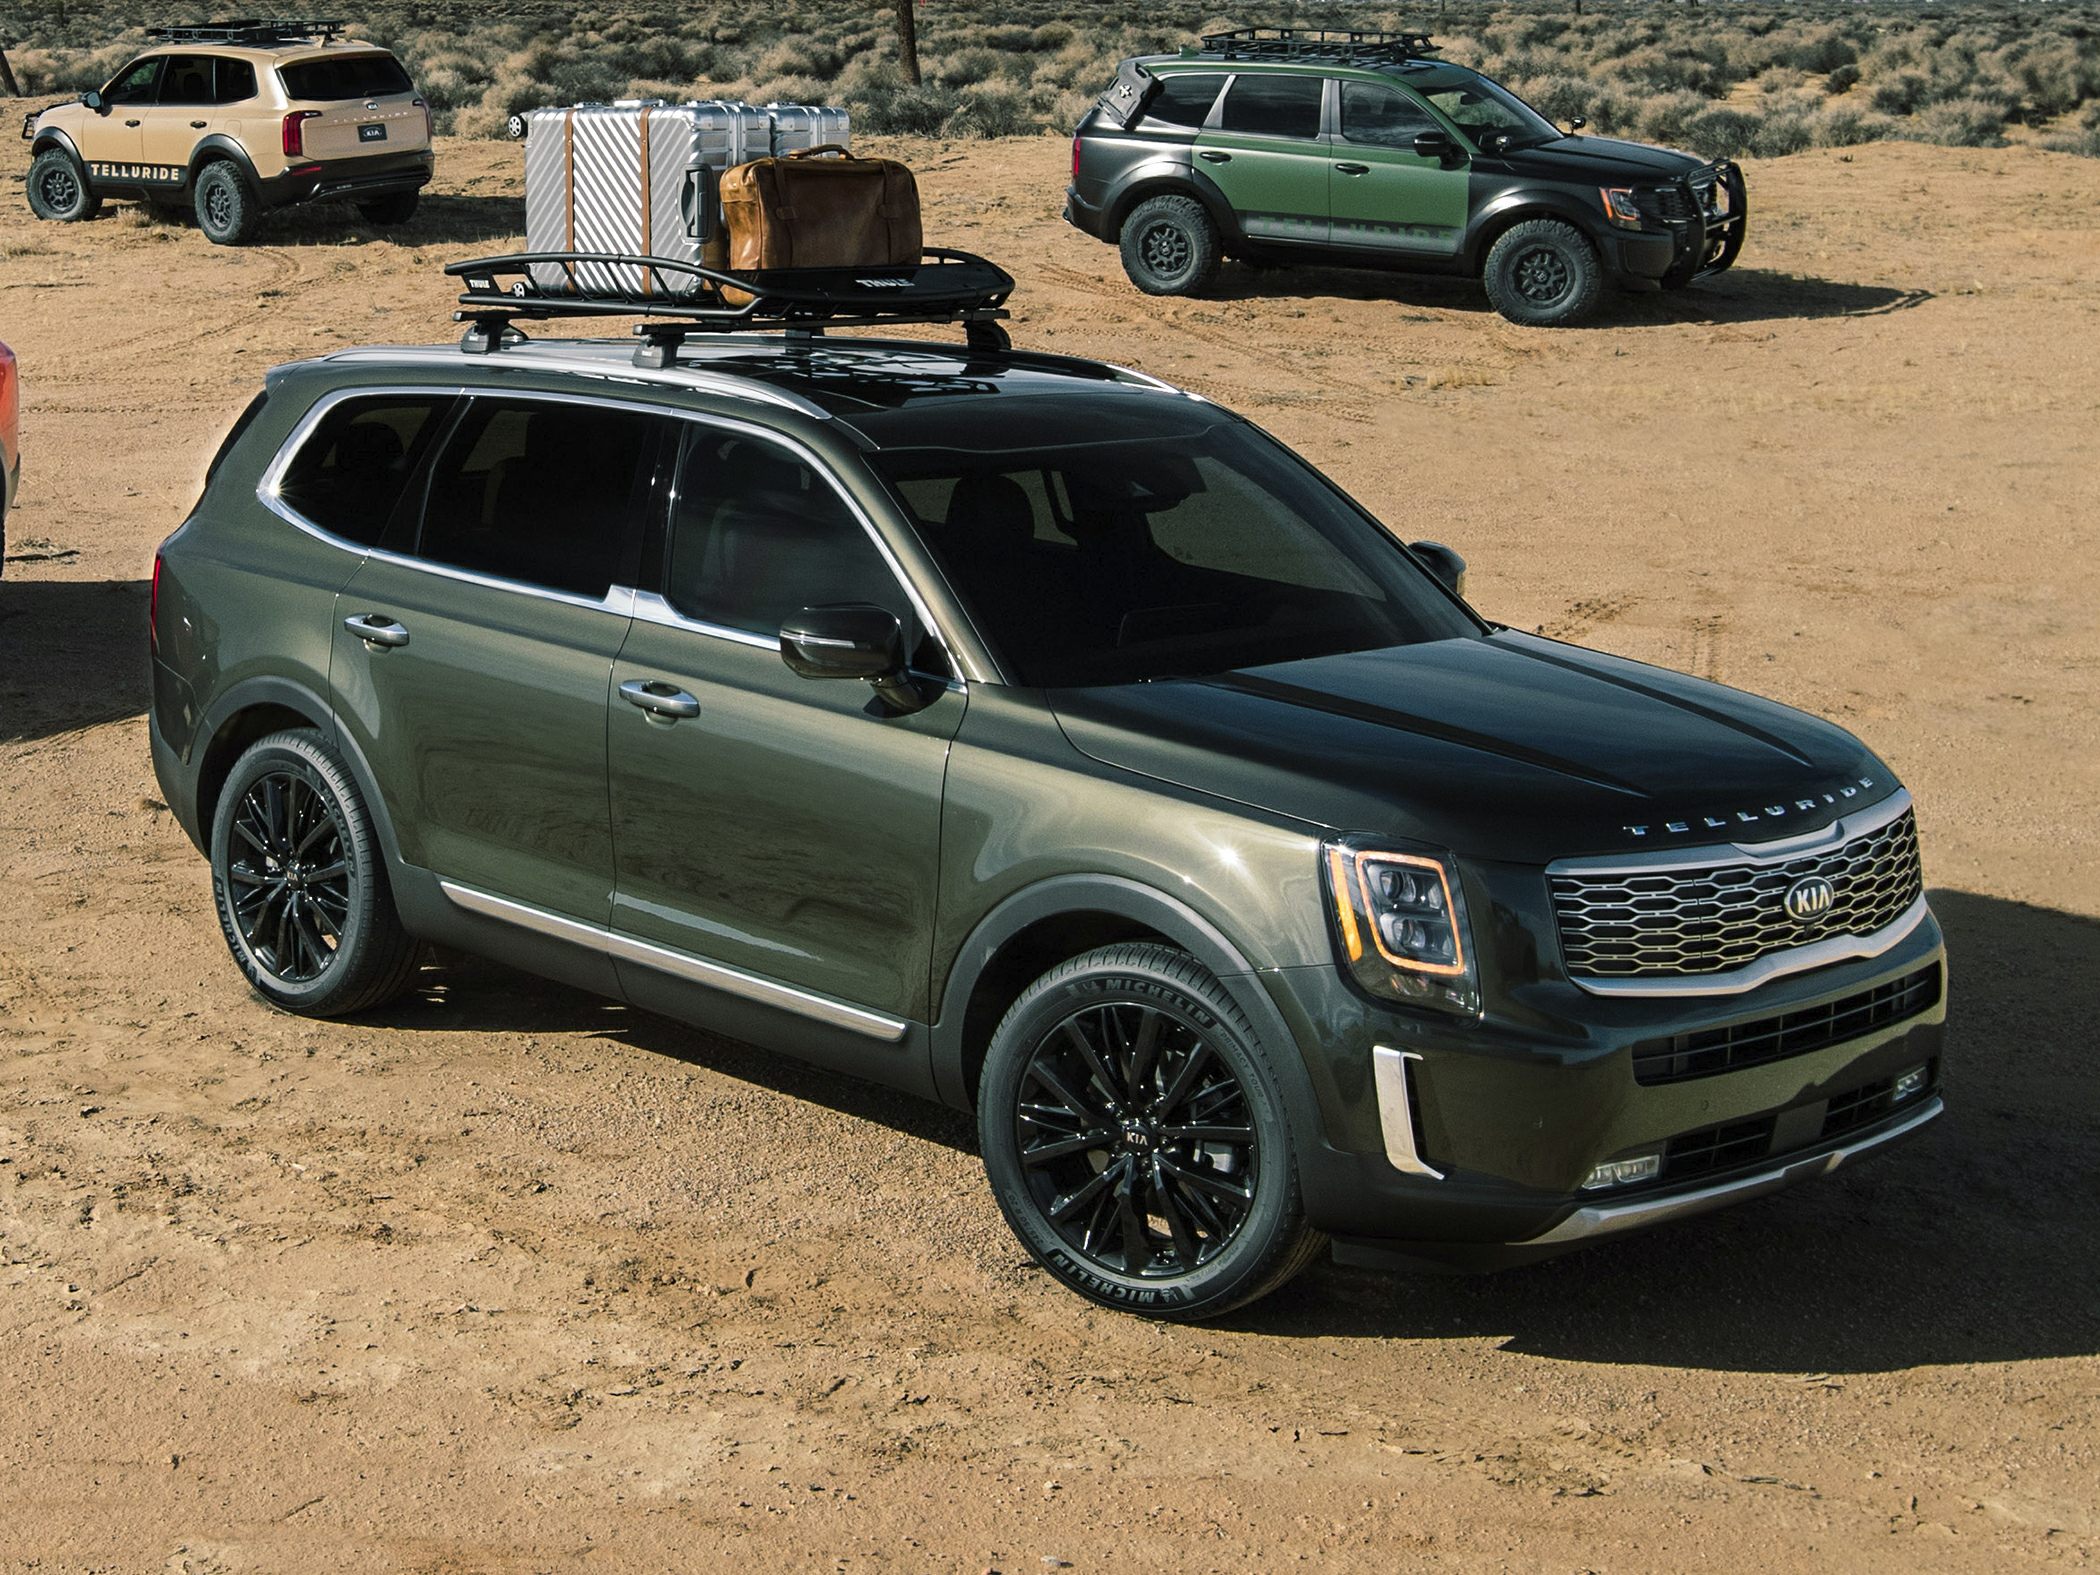 2020 Kia Telluride Deals Prices Incentives Leases Overview 